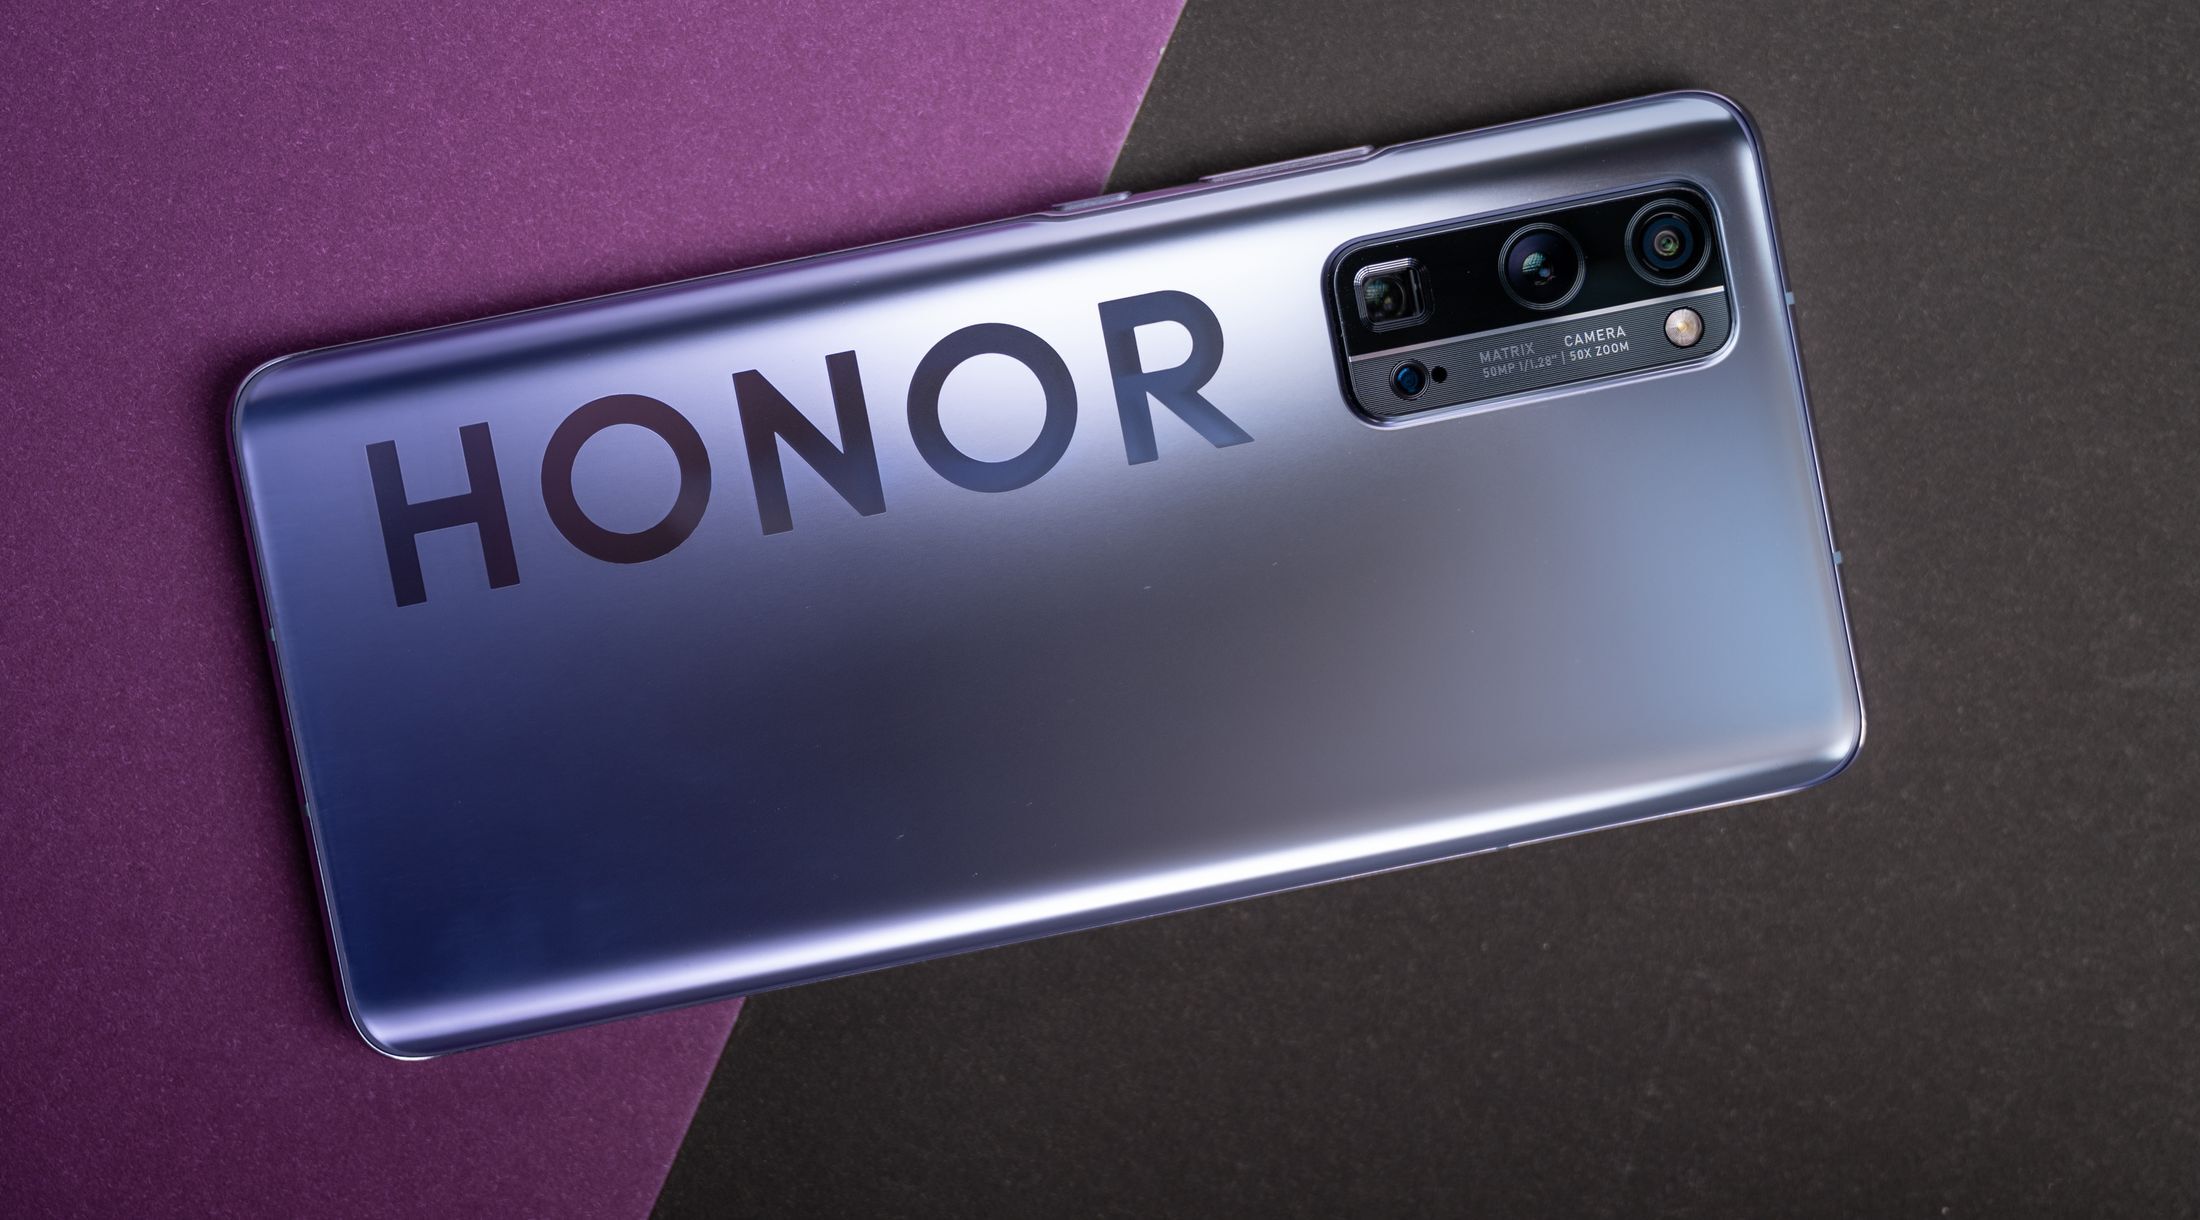  Honor      Android  Huawei